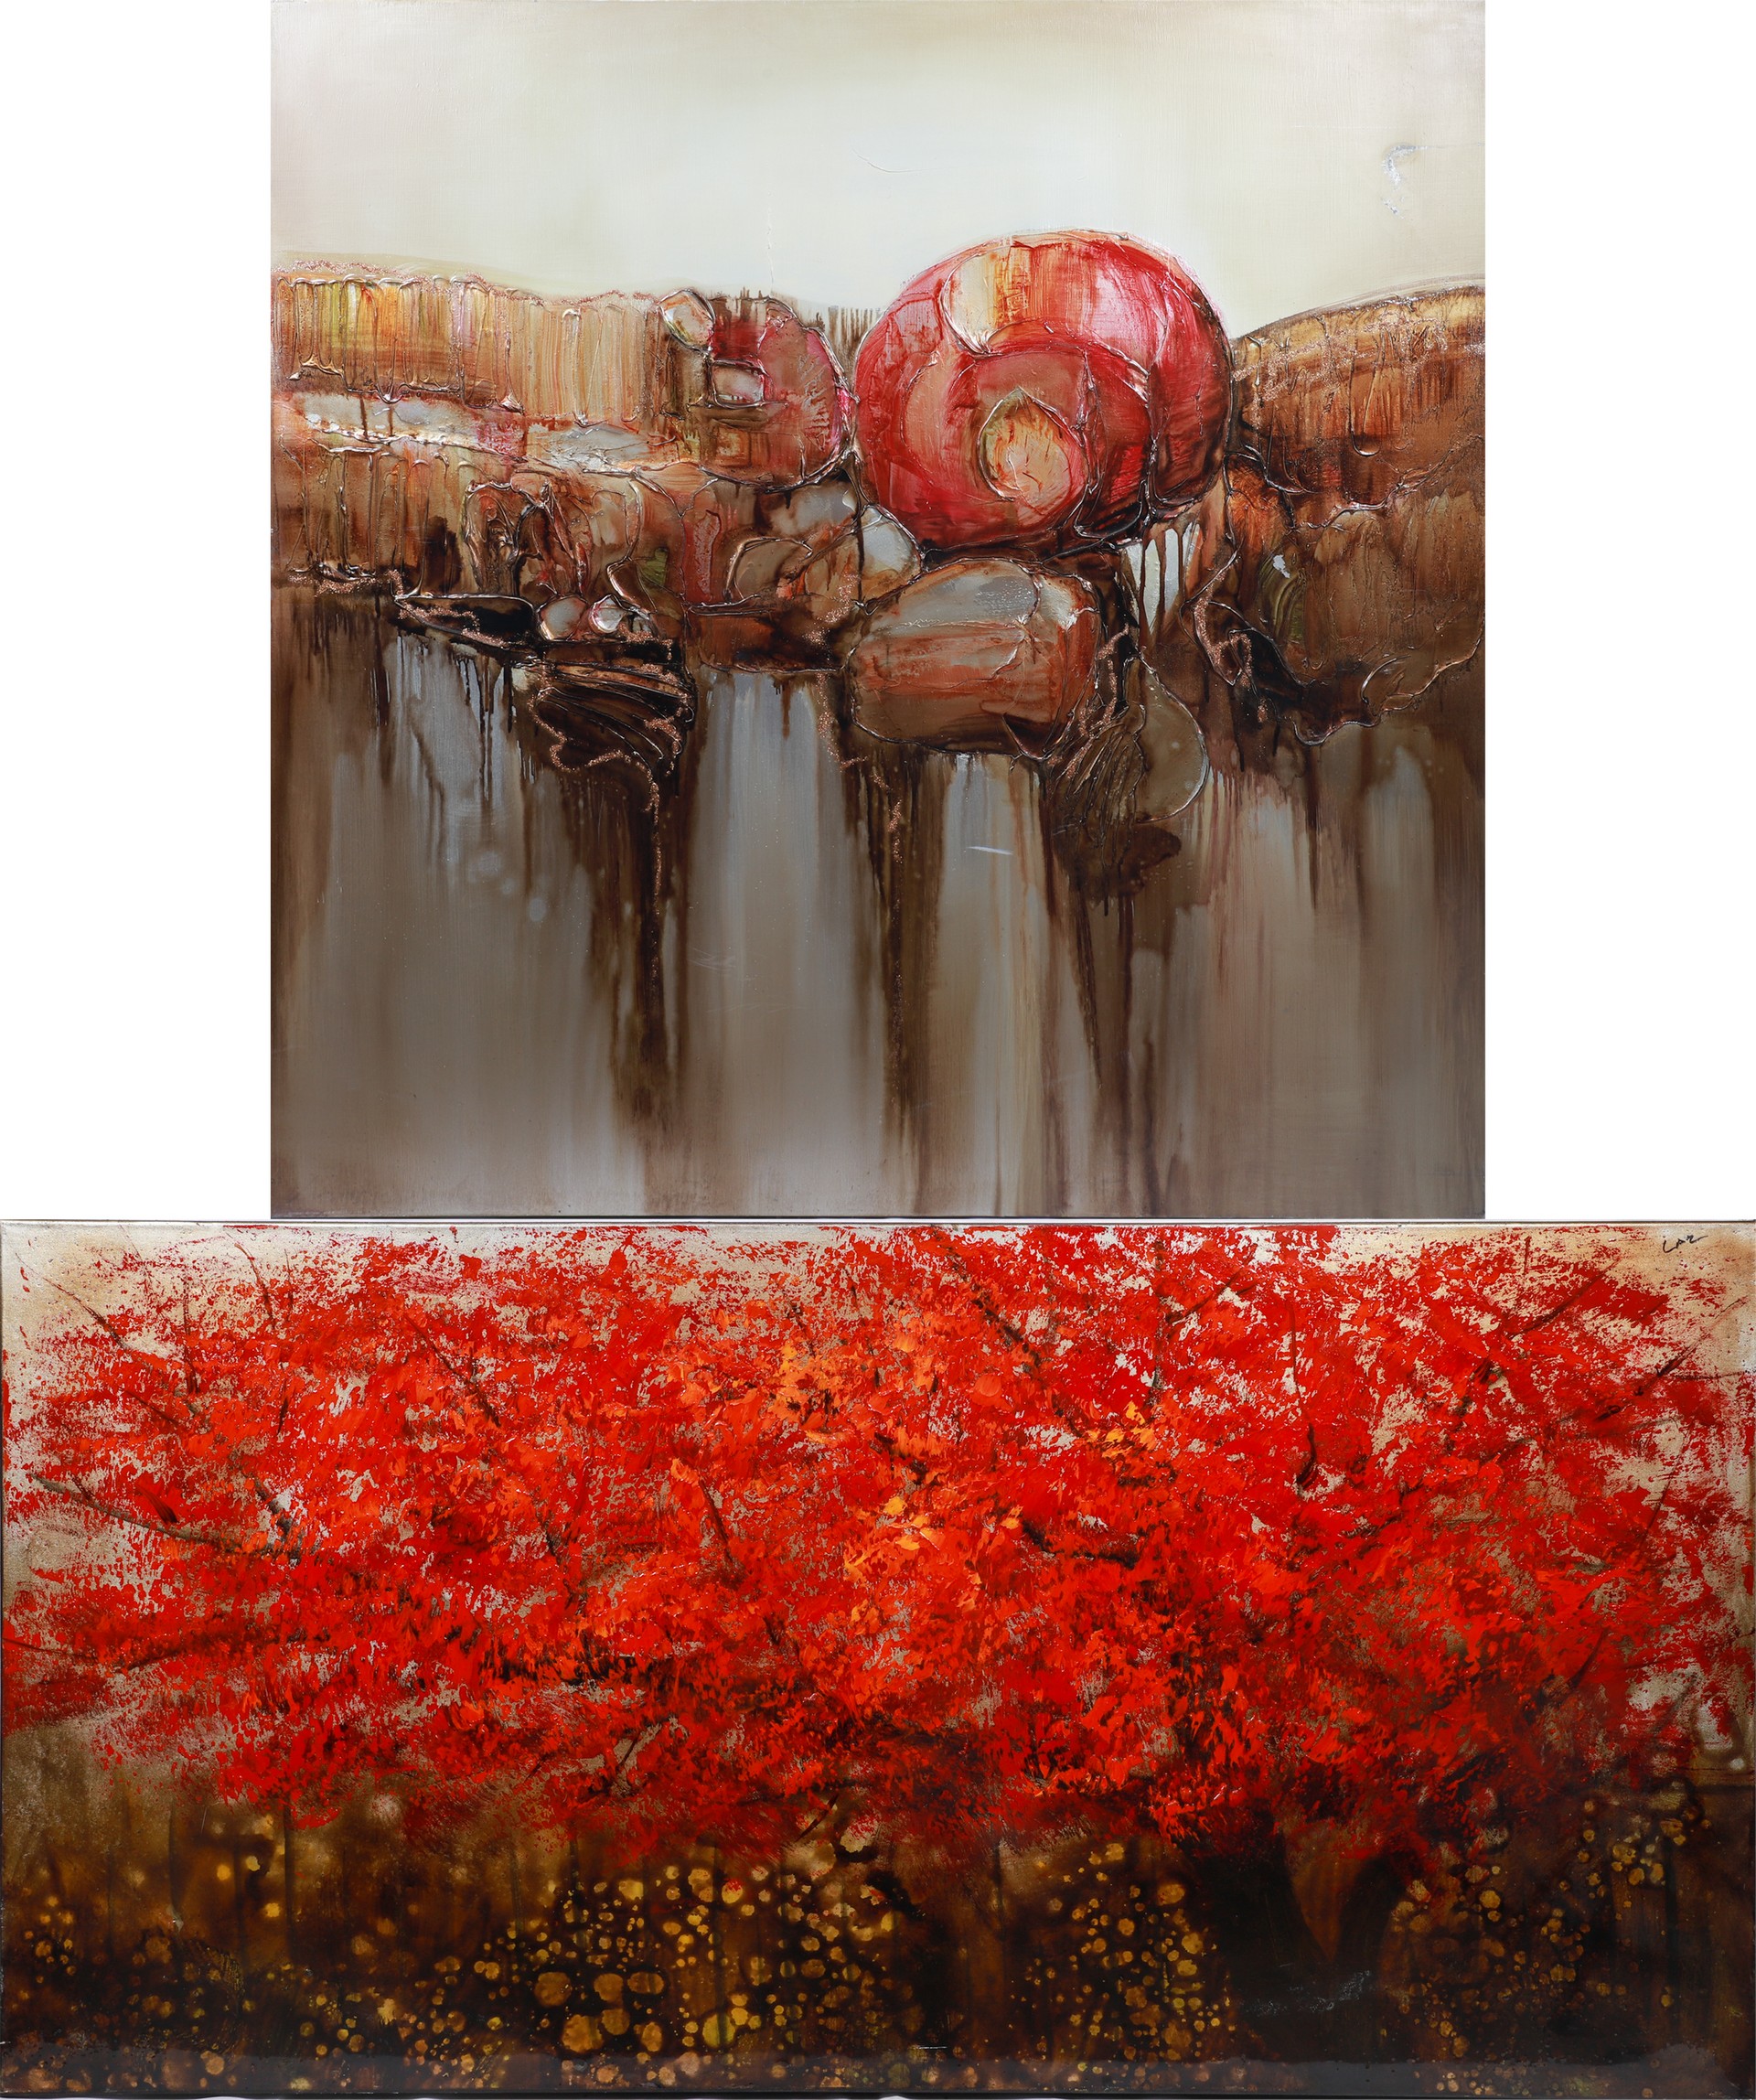 (2) Large format abstract paintings,